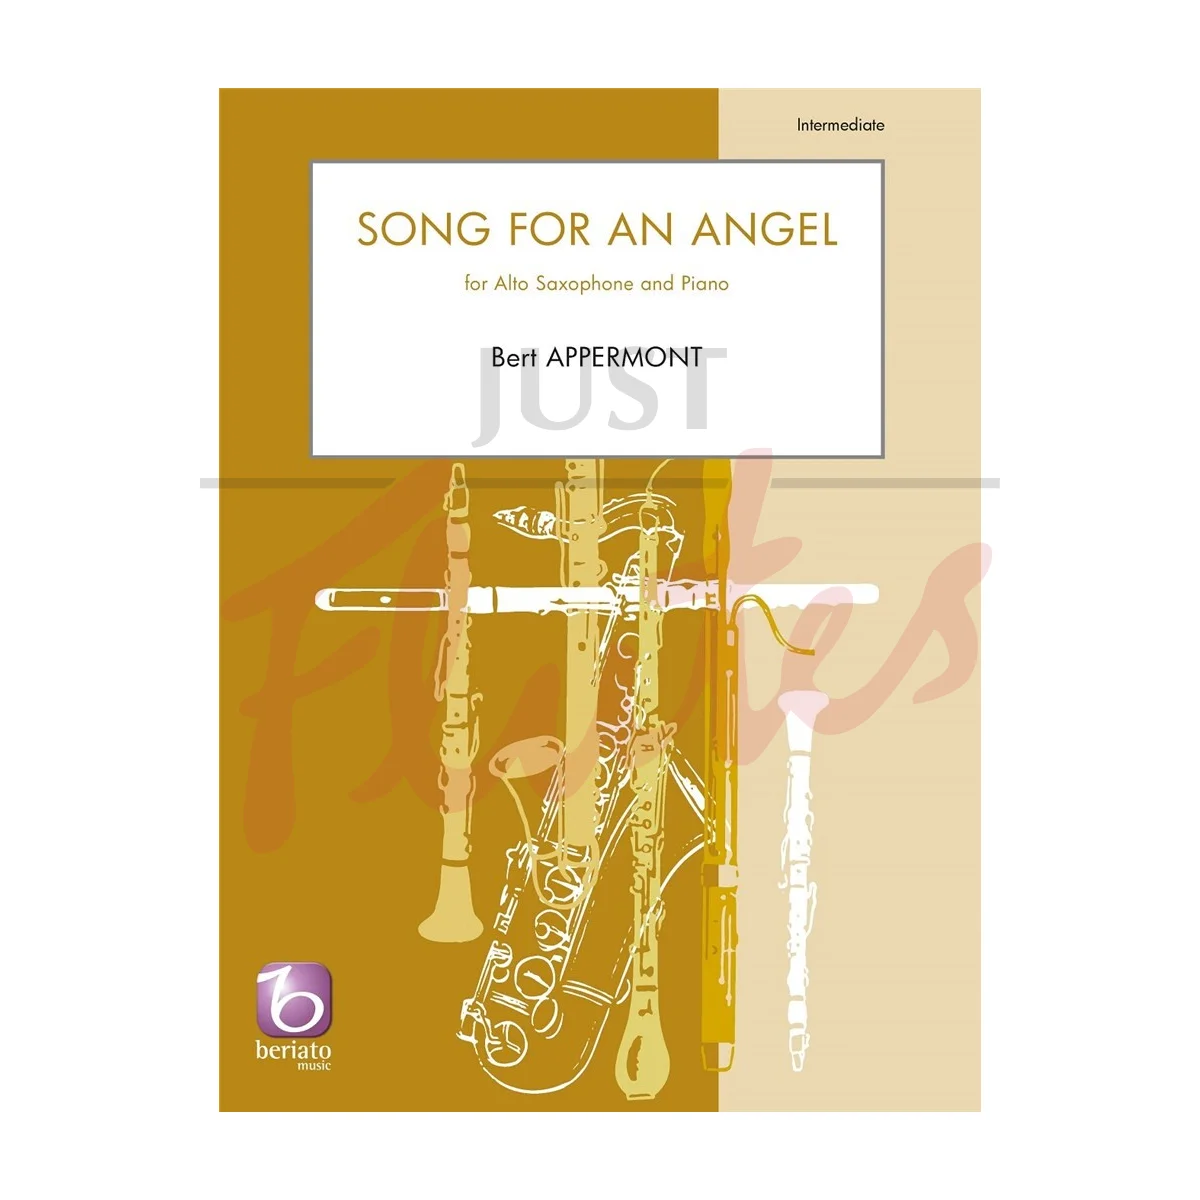 Song for an Angel for Alto Saxophone and Piano